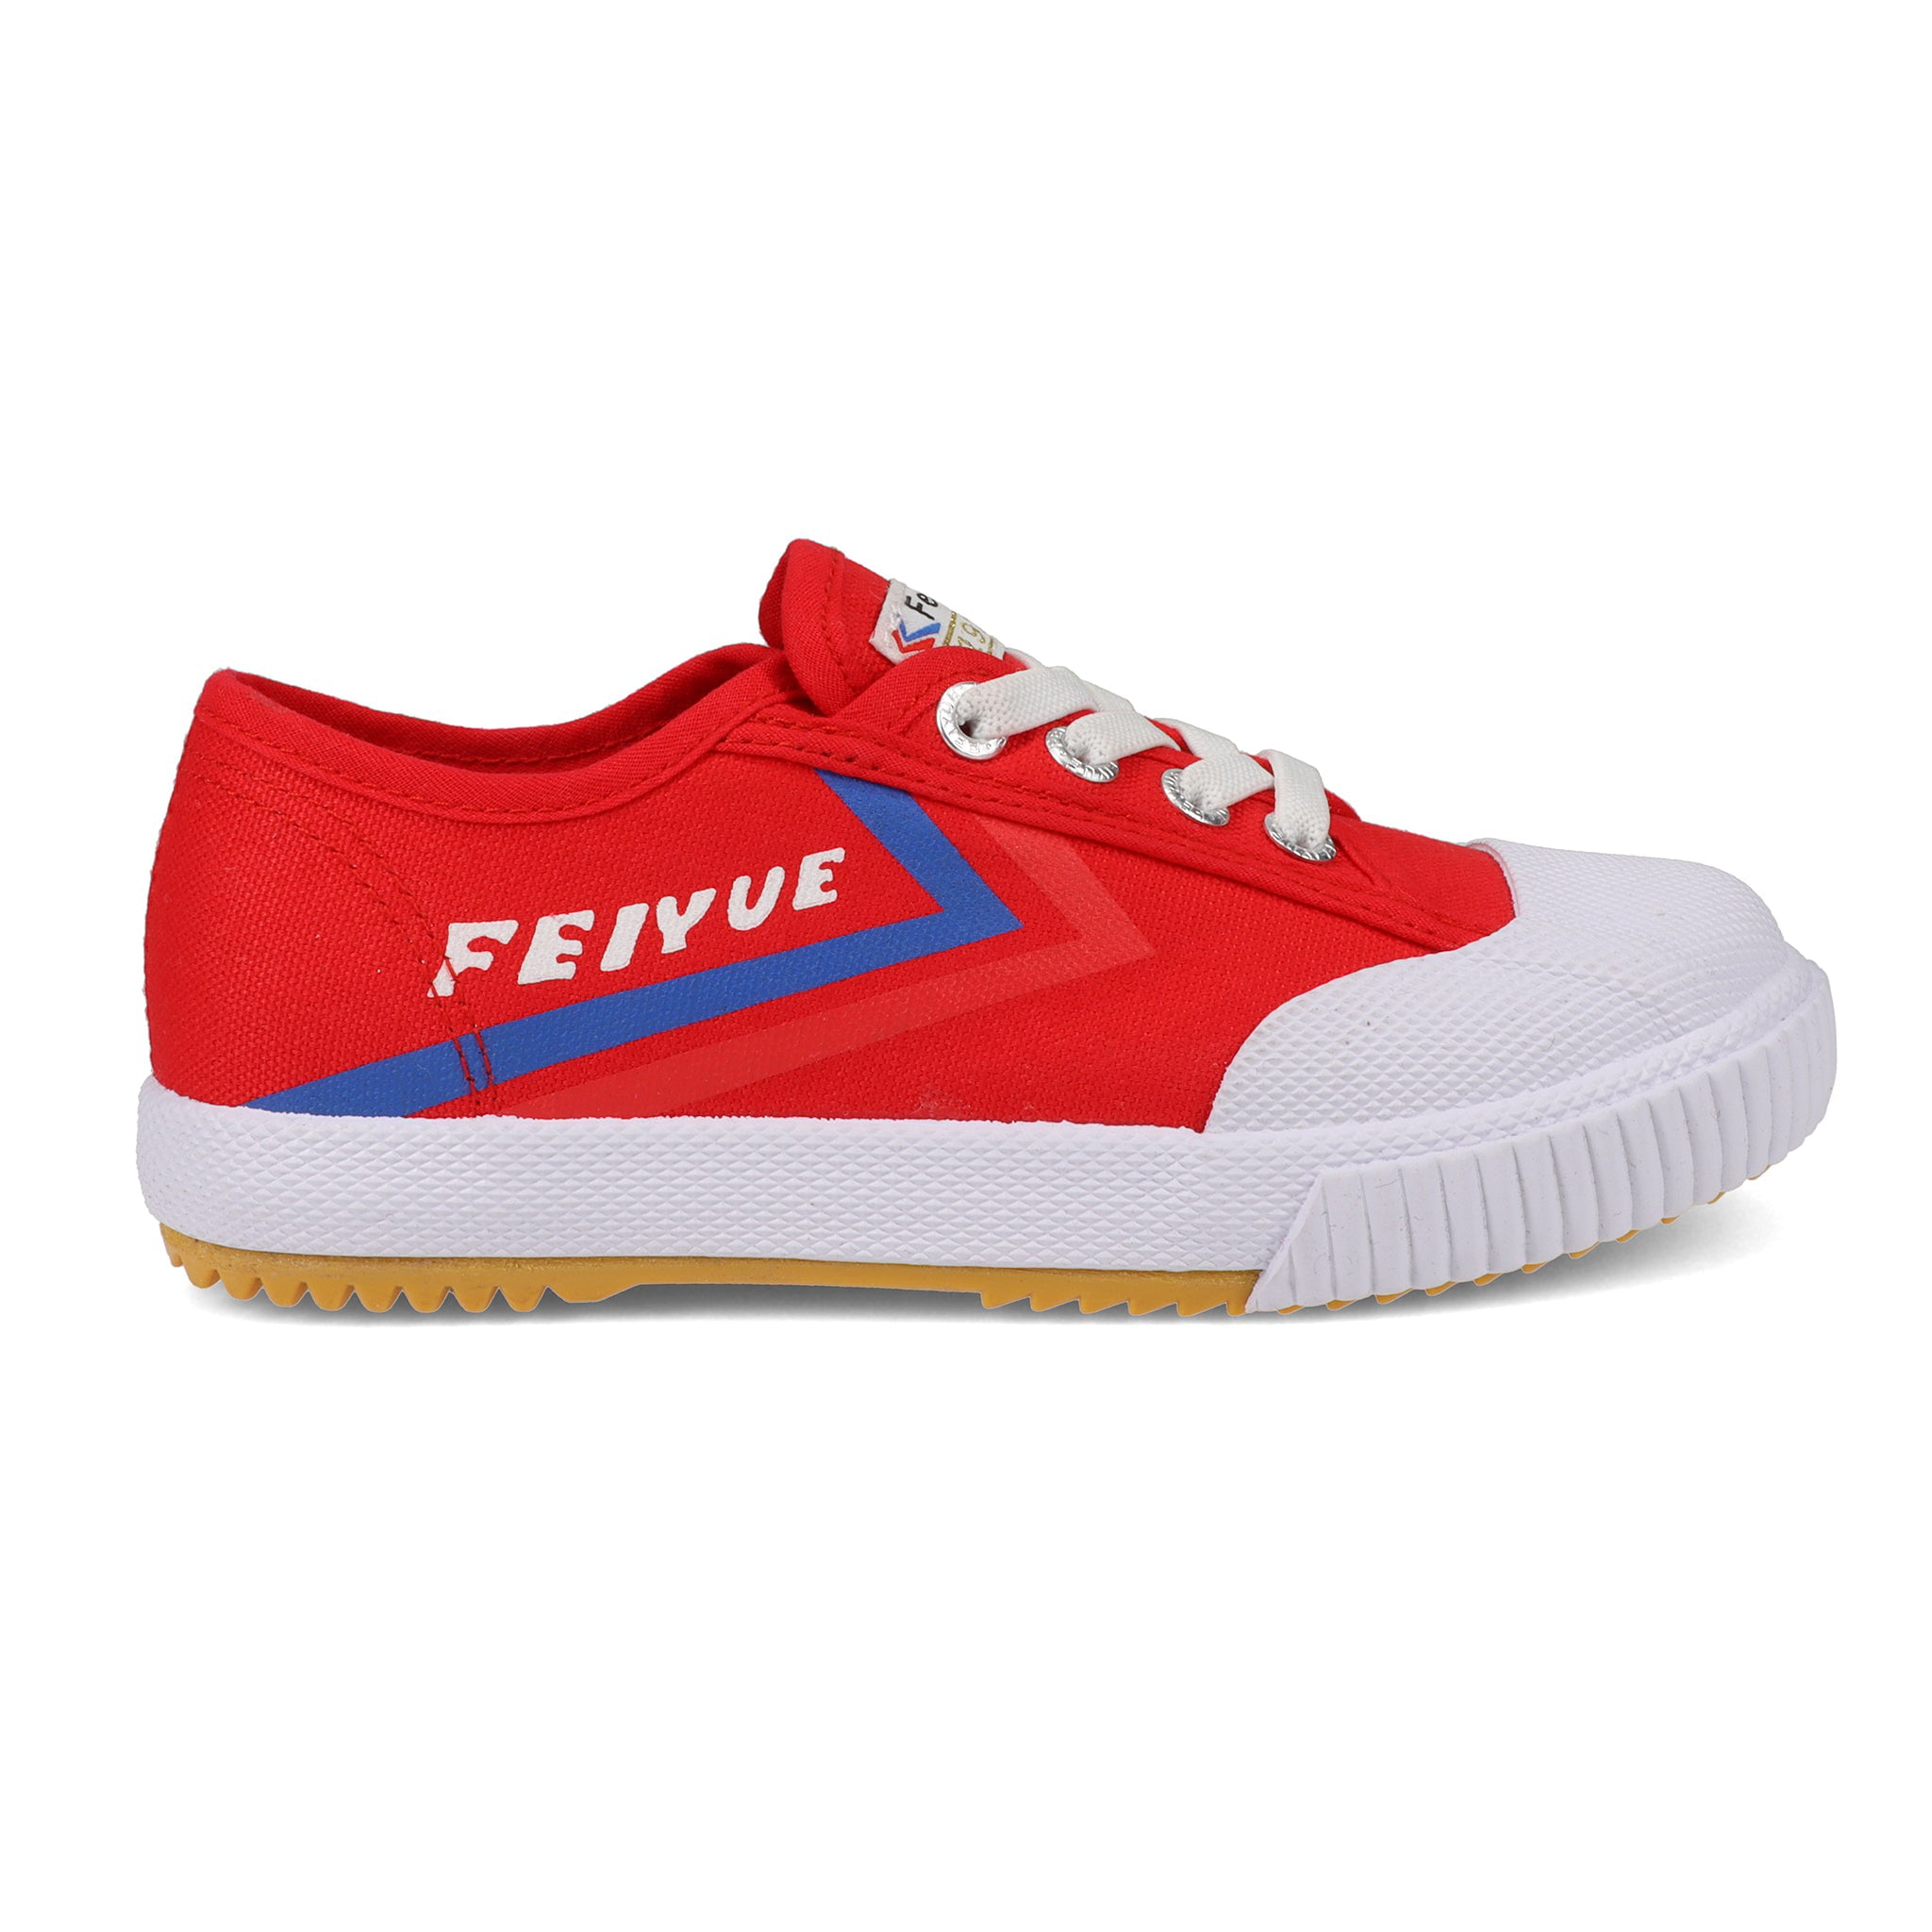 Feiyue Tiger Claw Review - BirthdayShoes